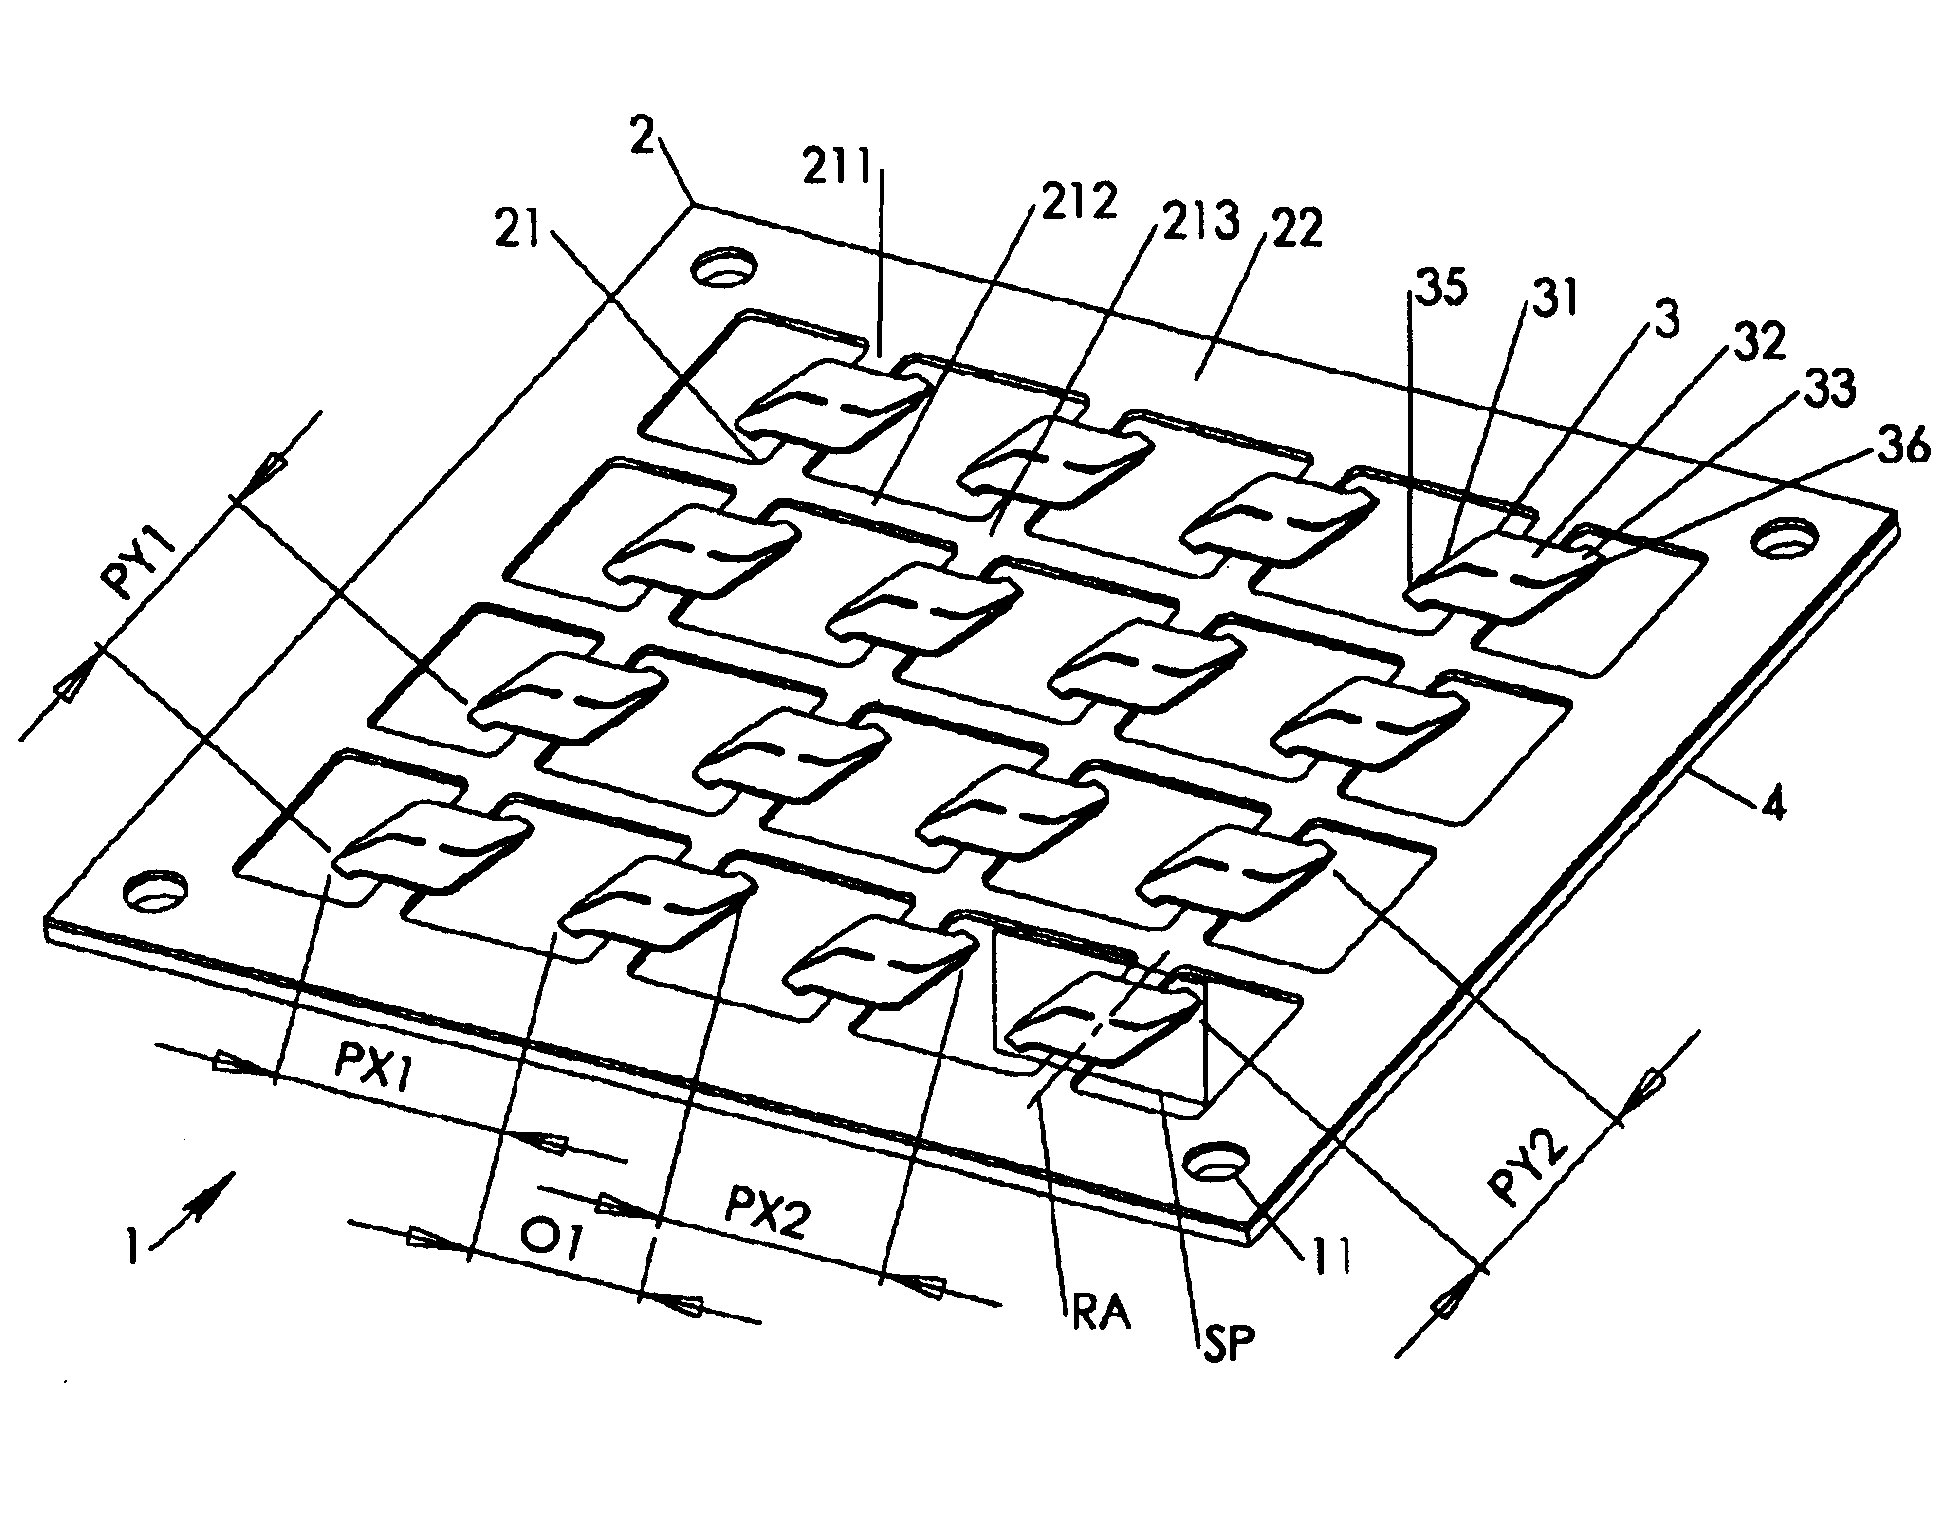 See-saw interconnect assembly with dielectric carrier grid providing spring suspension